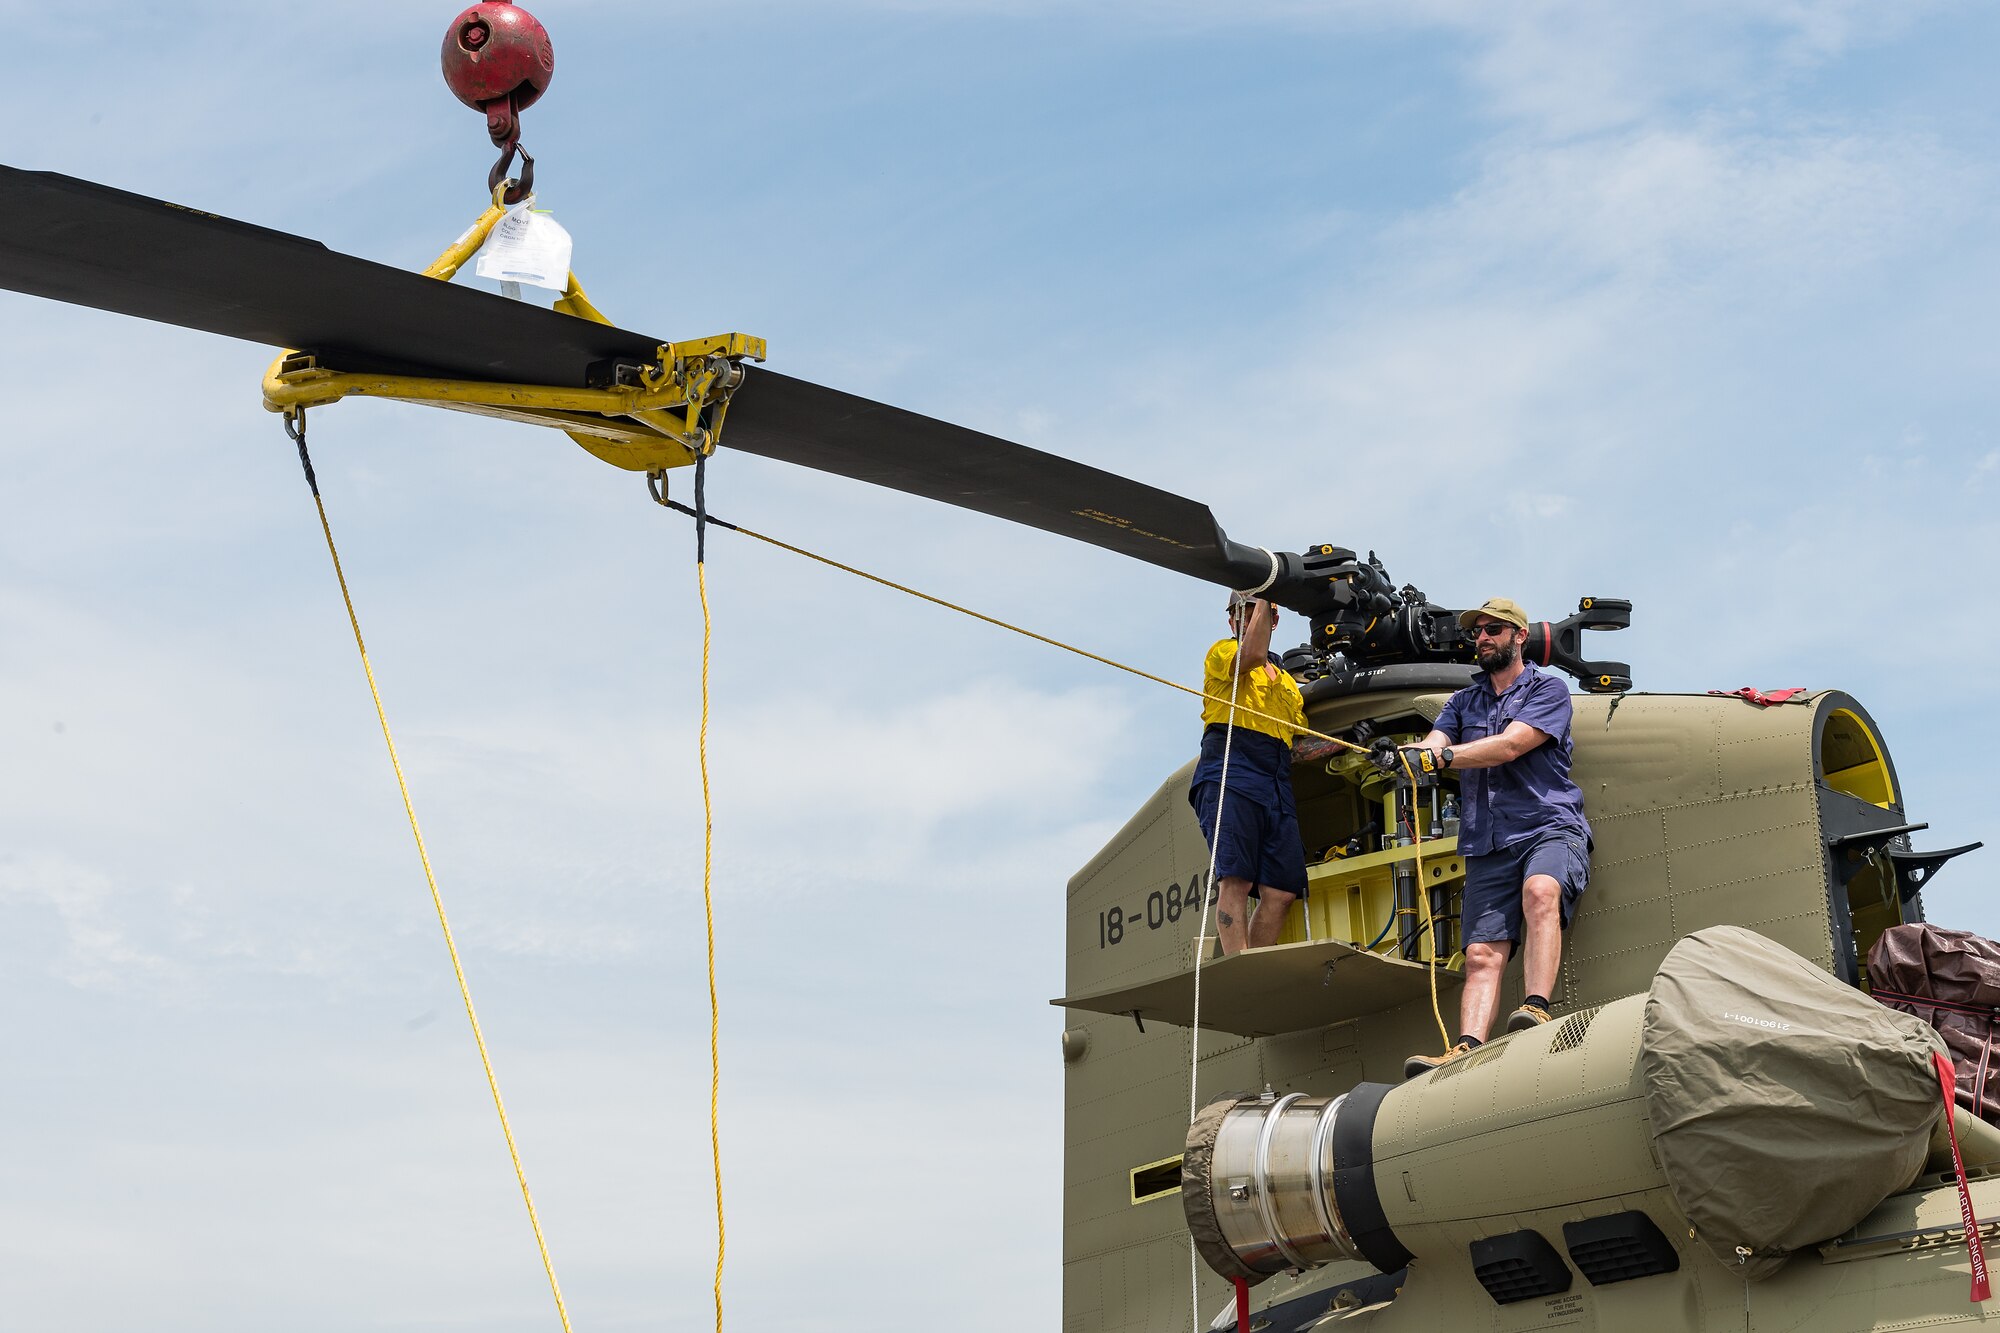 Boeing Defence Australia maintenance team members remove a rotor blade from a CH-47F Chinook helicopter at Dover Air Force Base, Delaware, June 9, 2021. BDA maintenance personnel readied two Chinooks for shipment aboard a C-5M Super Galaxy as part of the U.S. government’s foreign military sales program. The U.S.-Australia alliance is an anchor for peace and stability in the Indo-Pacific region and around the world. (U.S. Air Force photo by Roland Balik)